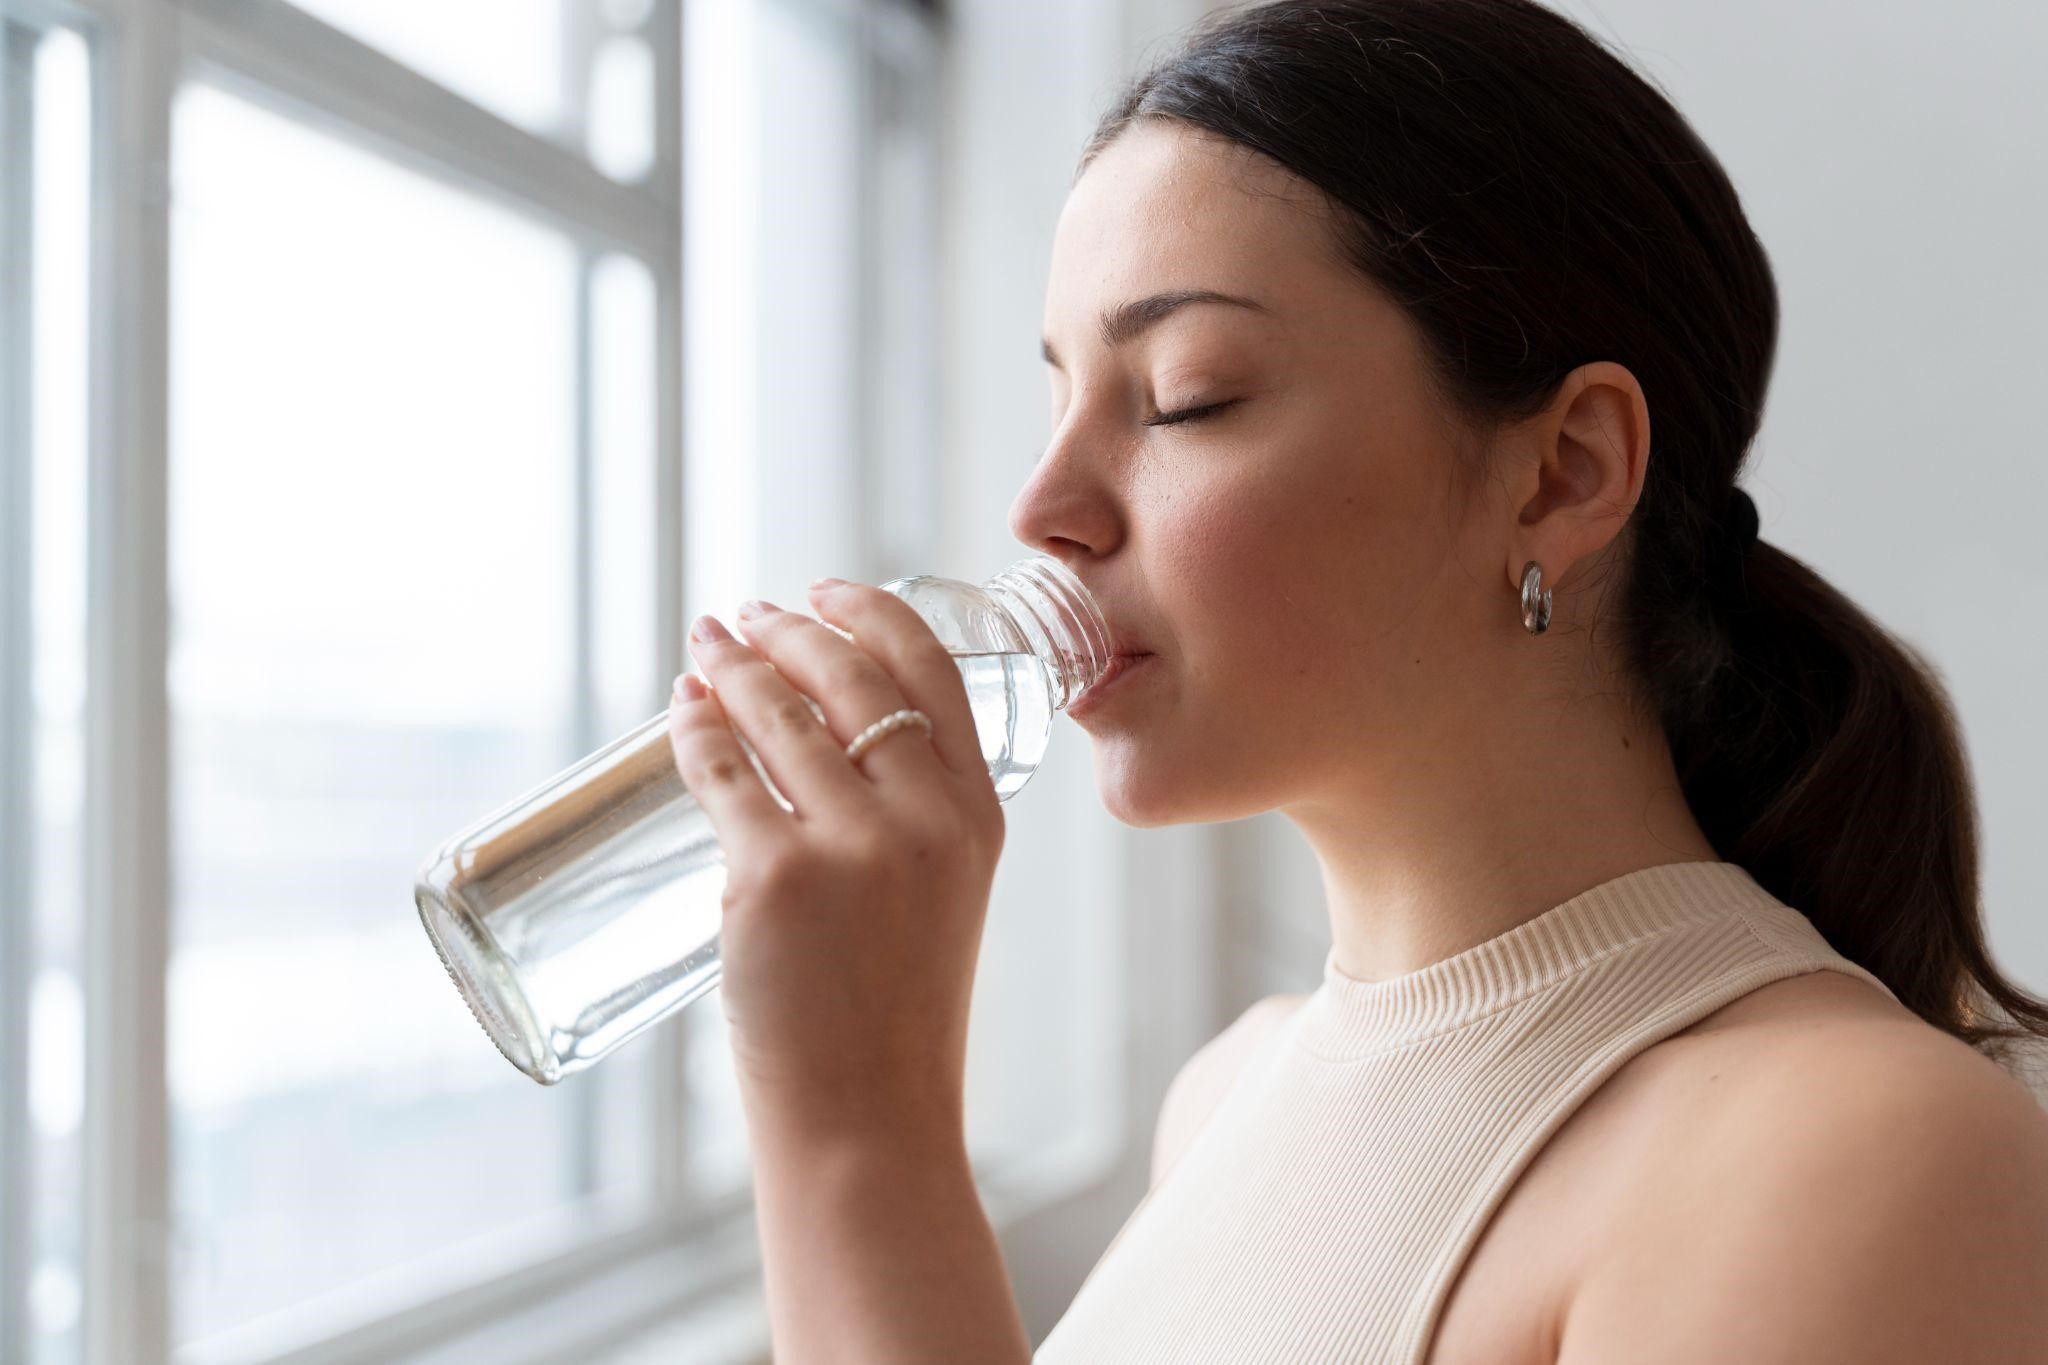 How much Water should you drink every day